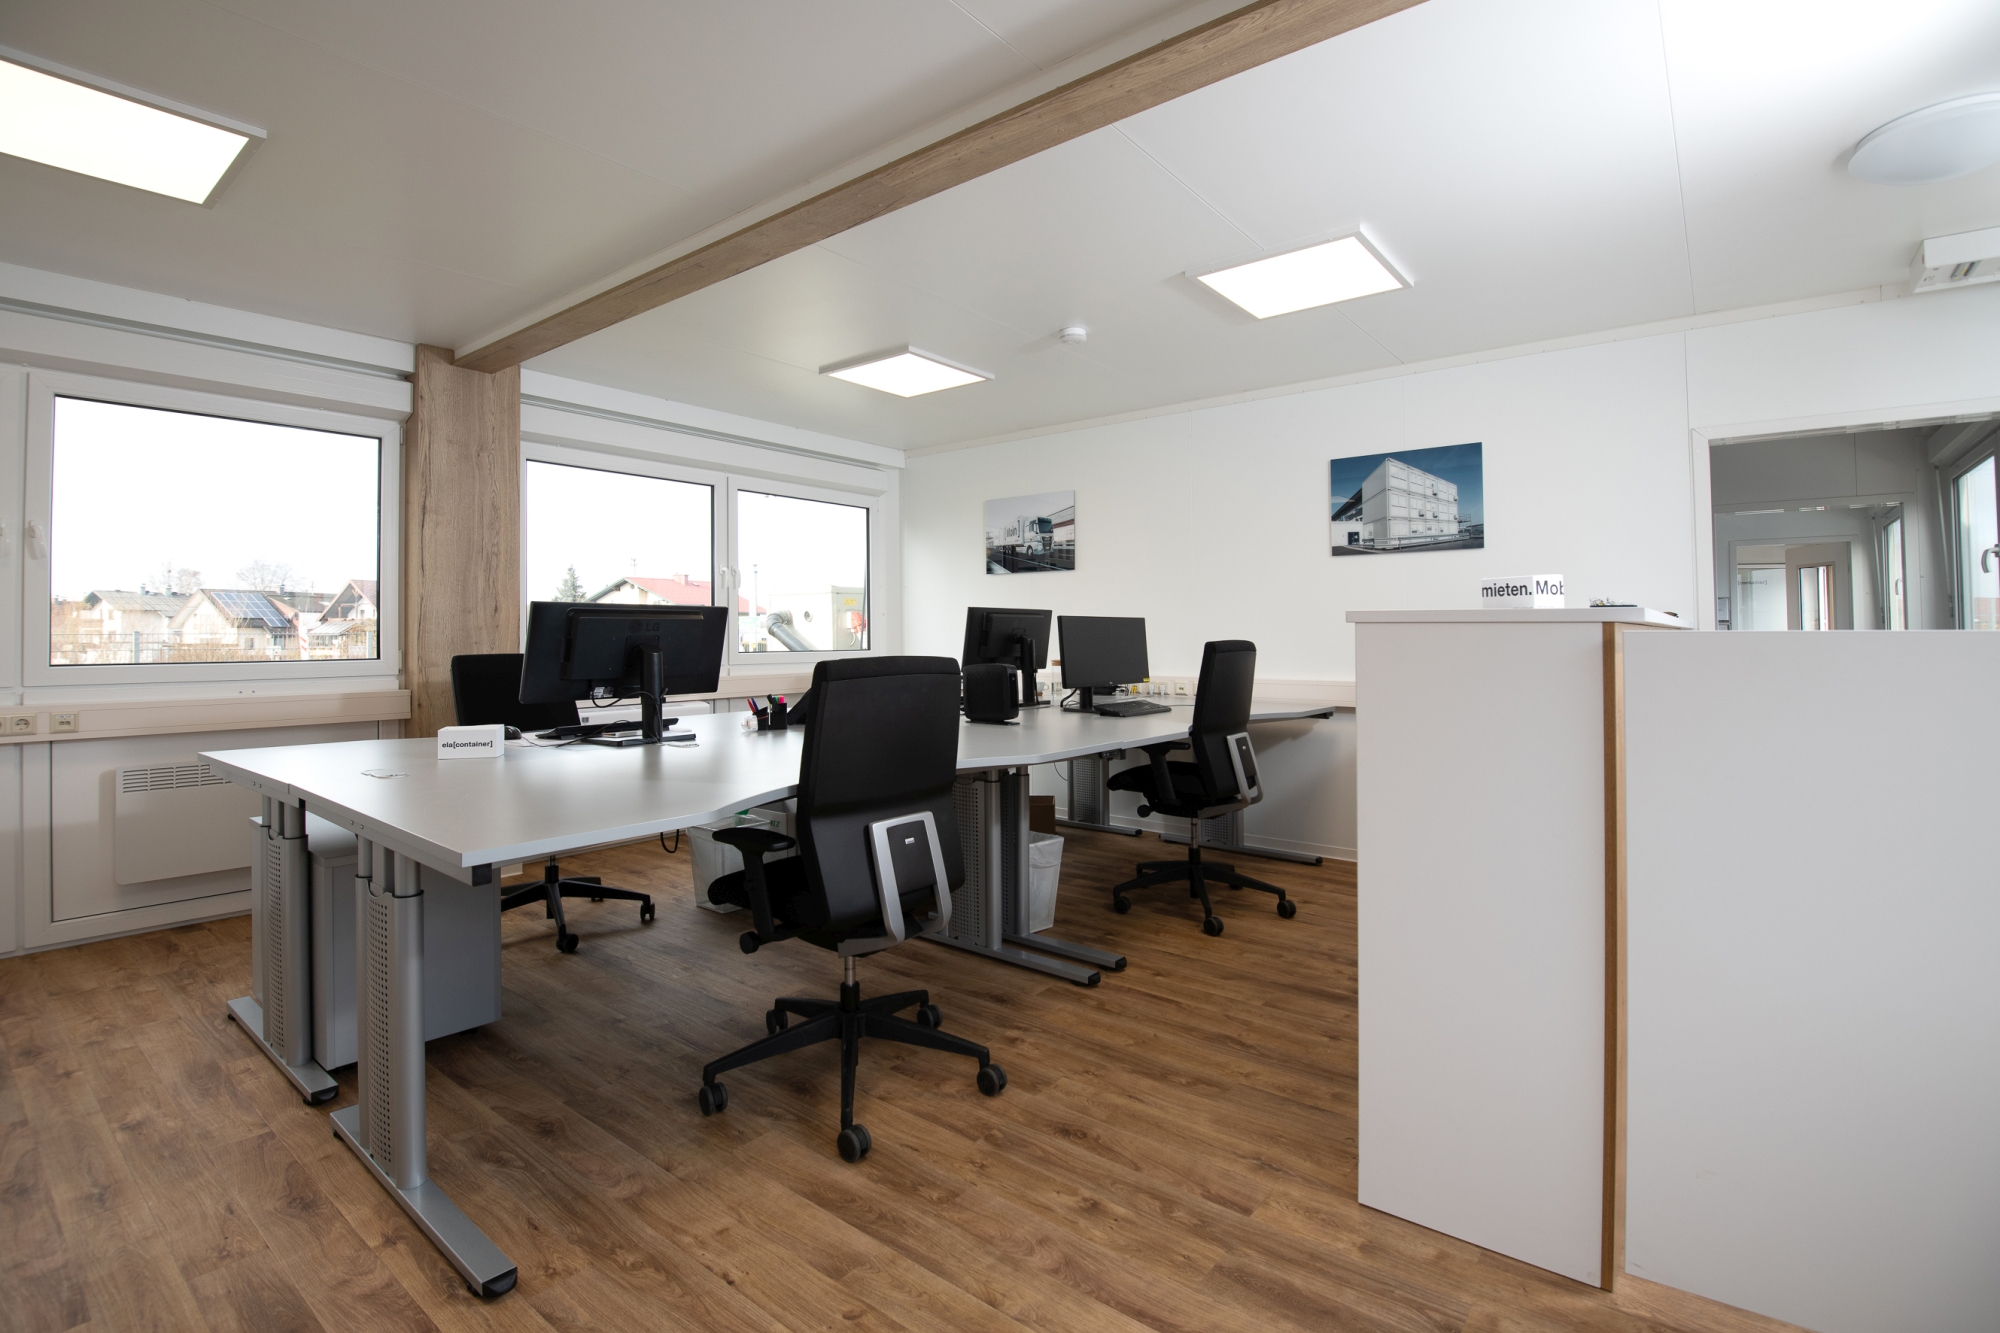 The three-metre-wide premium modules also serve as bright and friendly office spaces for ELA employees in Austria.